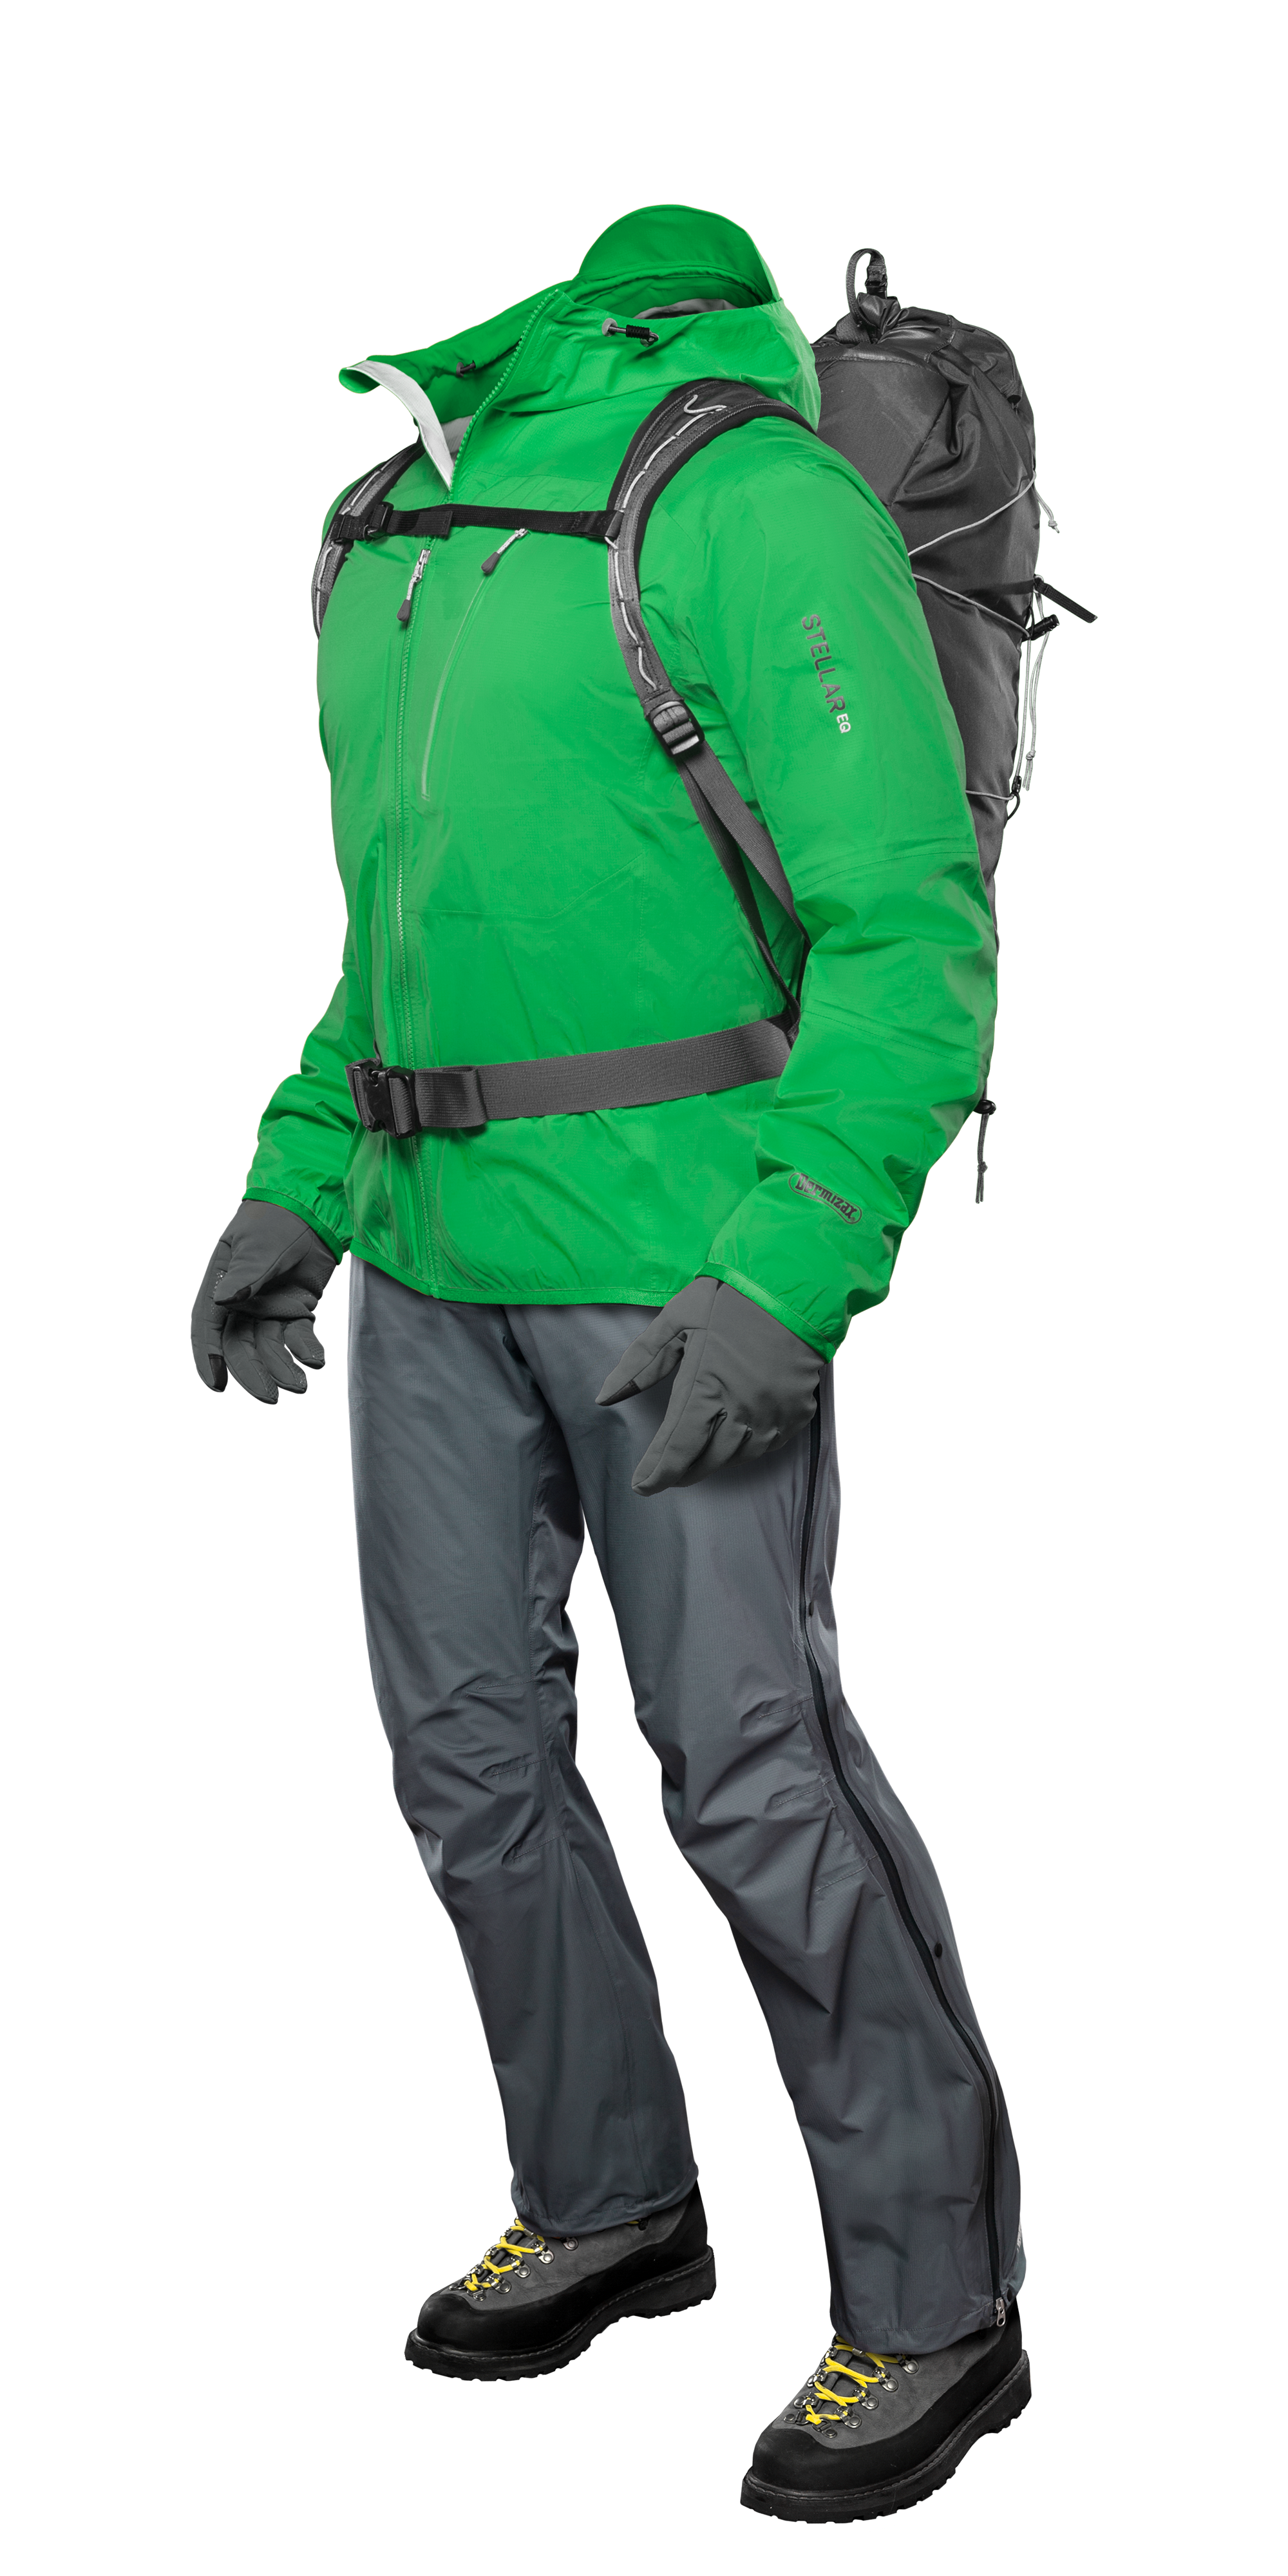 The [GREEN+GREY] Ultralight System Image